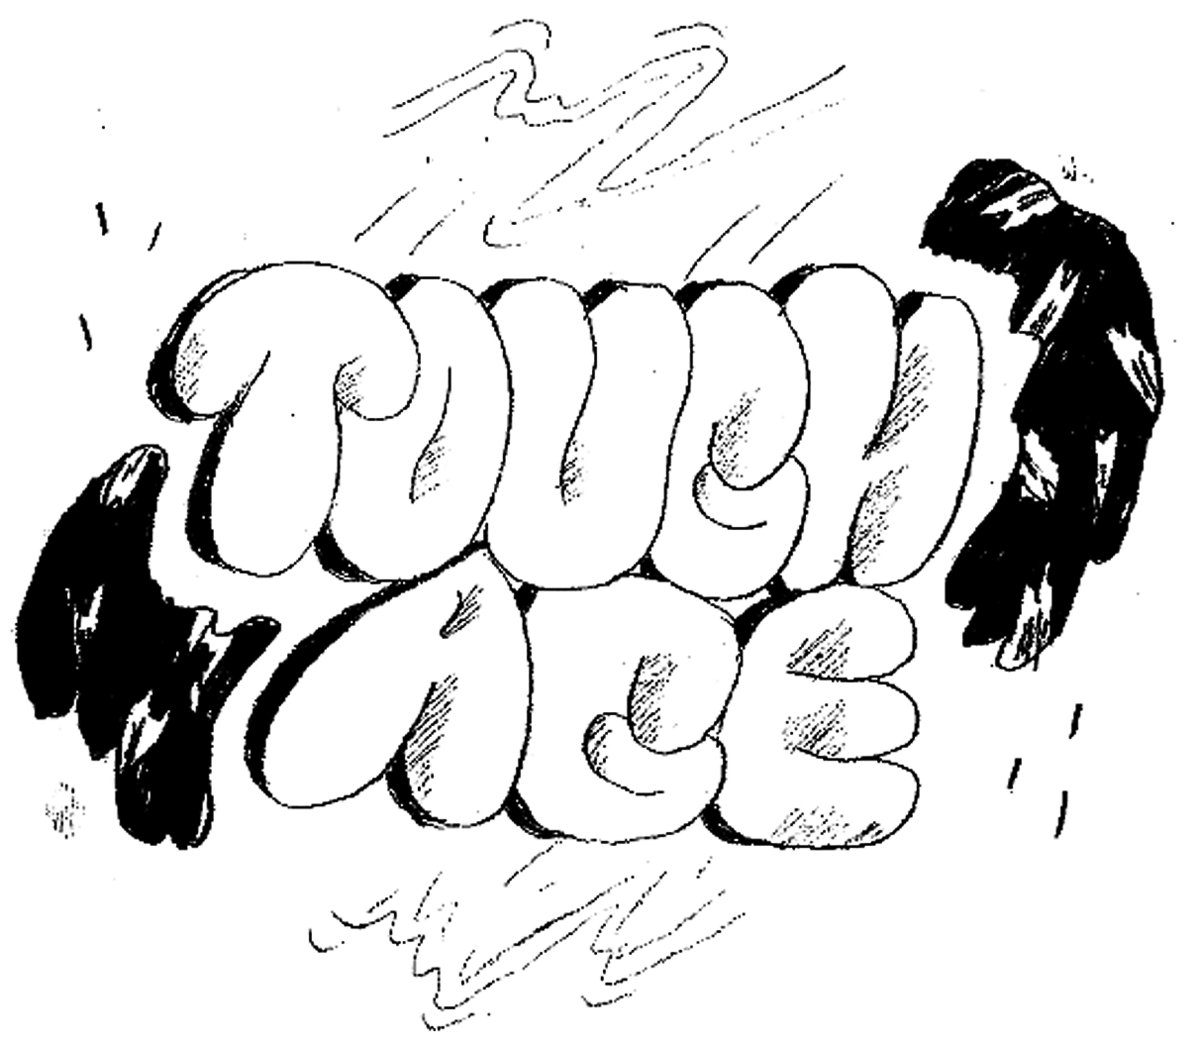 lettering by Moses Magee